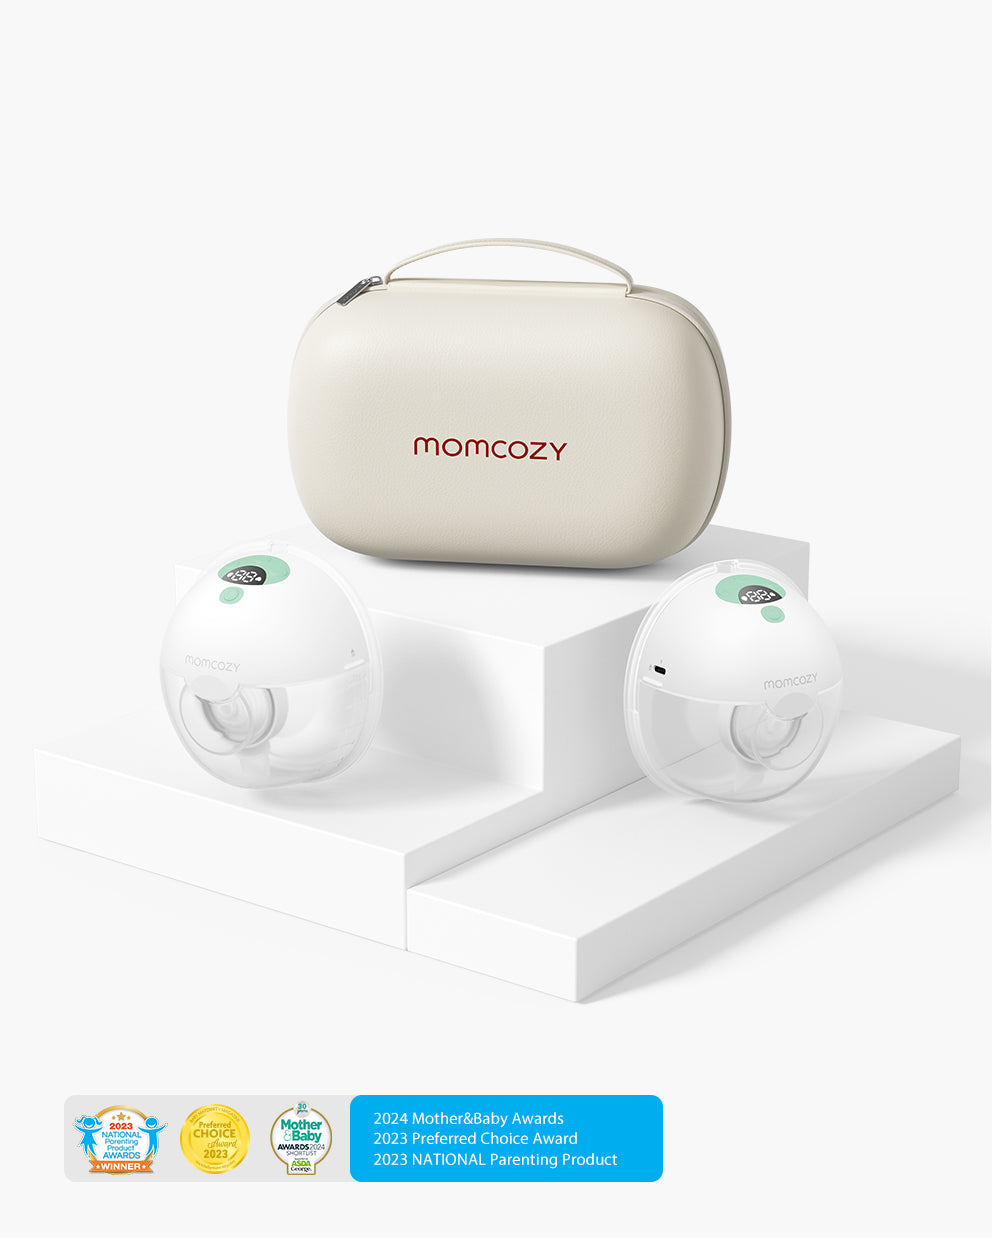 Momcozy - Latest Emails, Sales & Deals